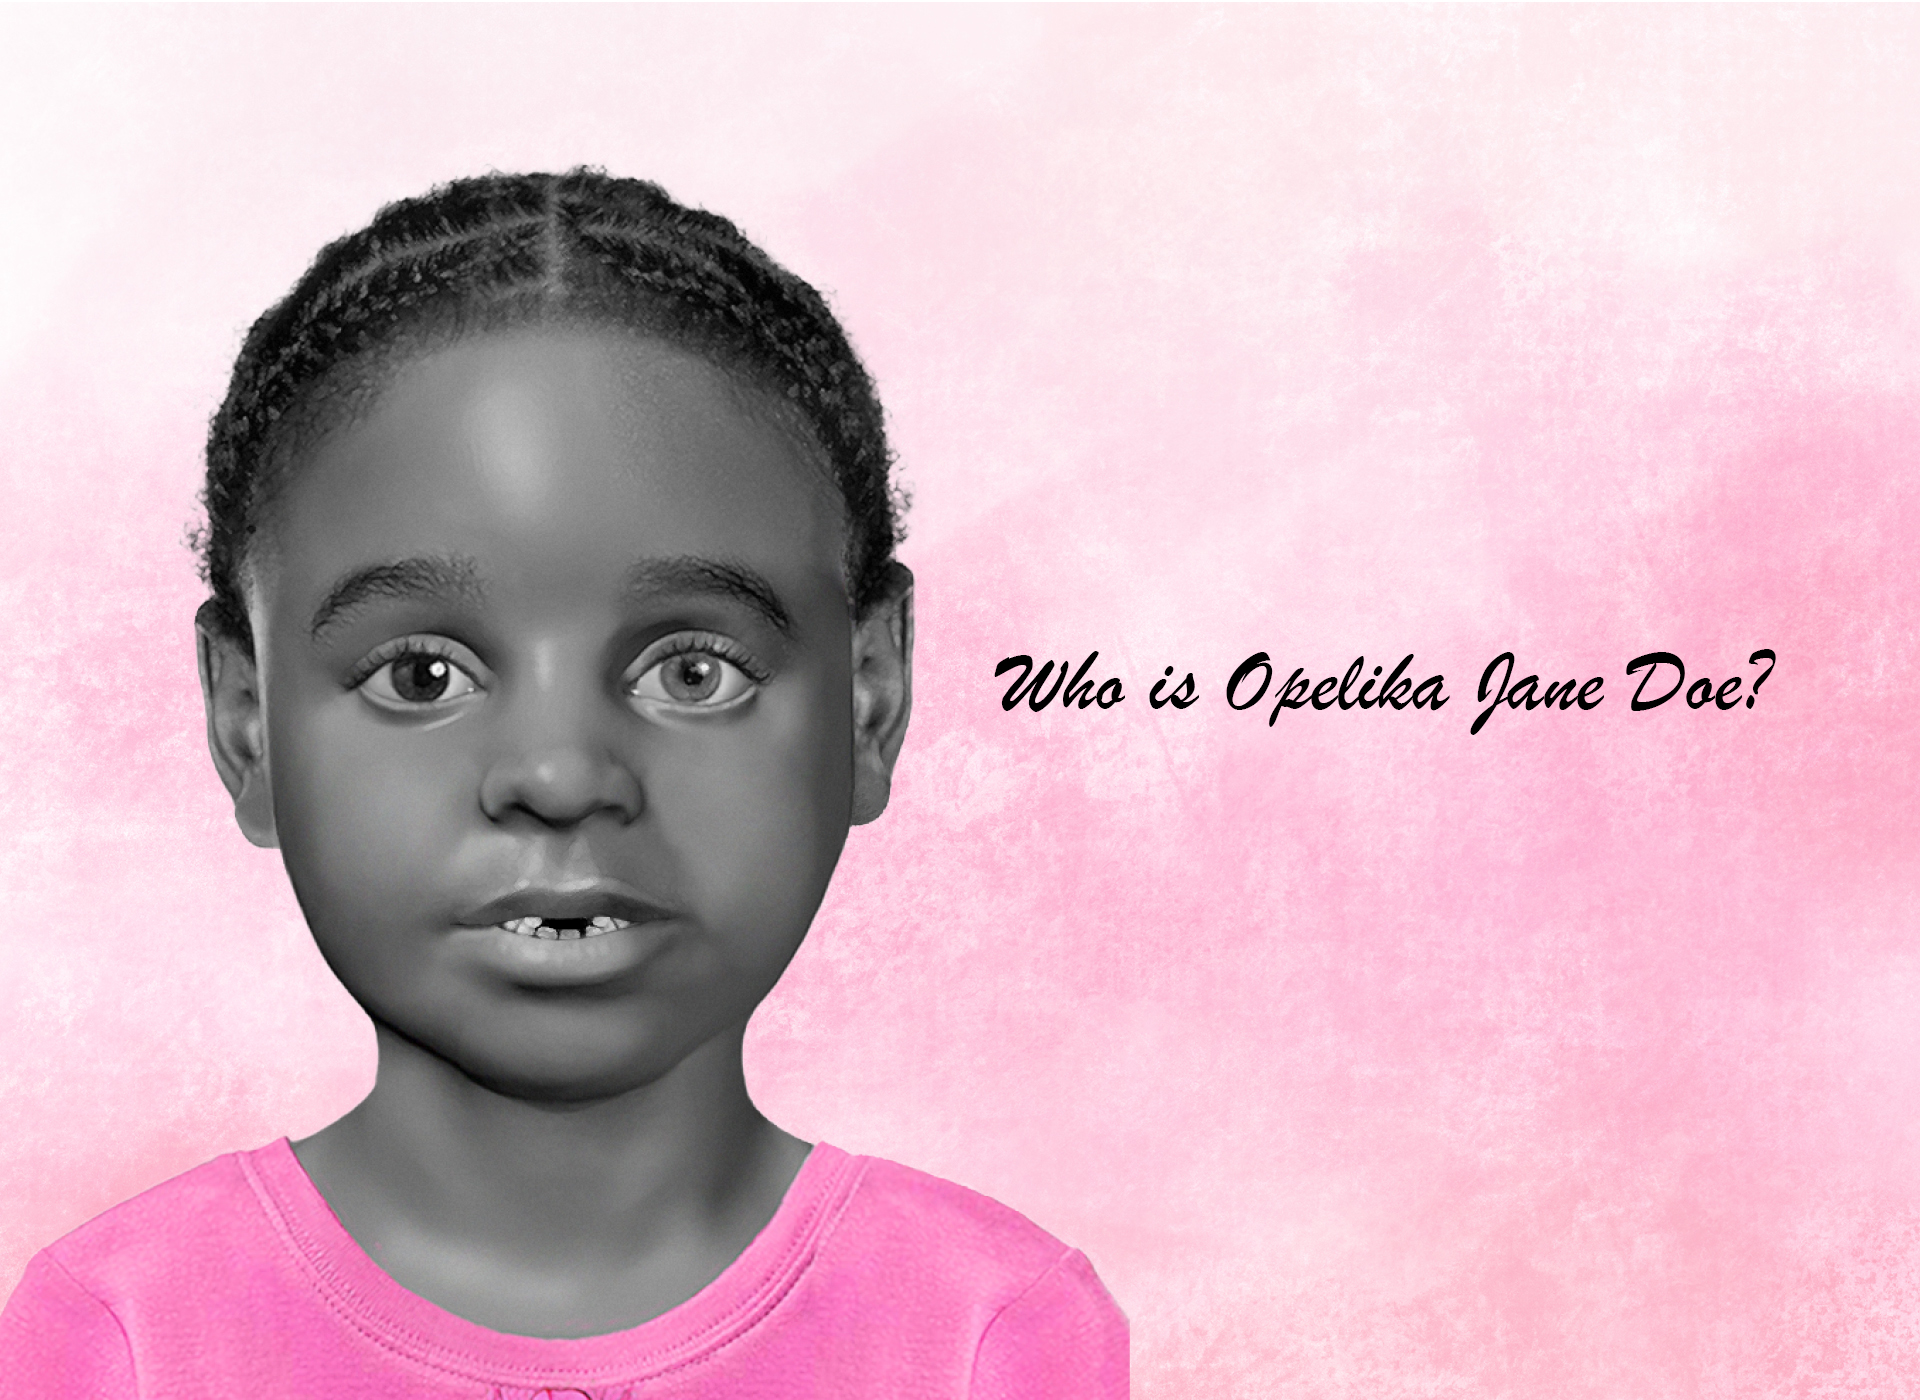 render of missing child- african american girl in pink shirt